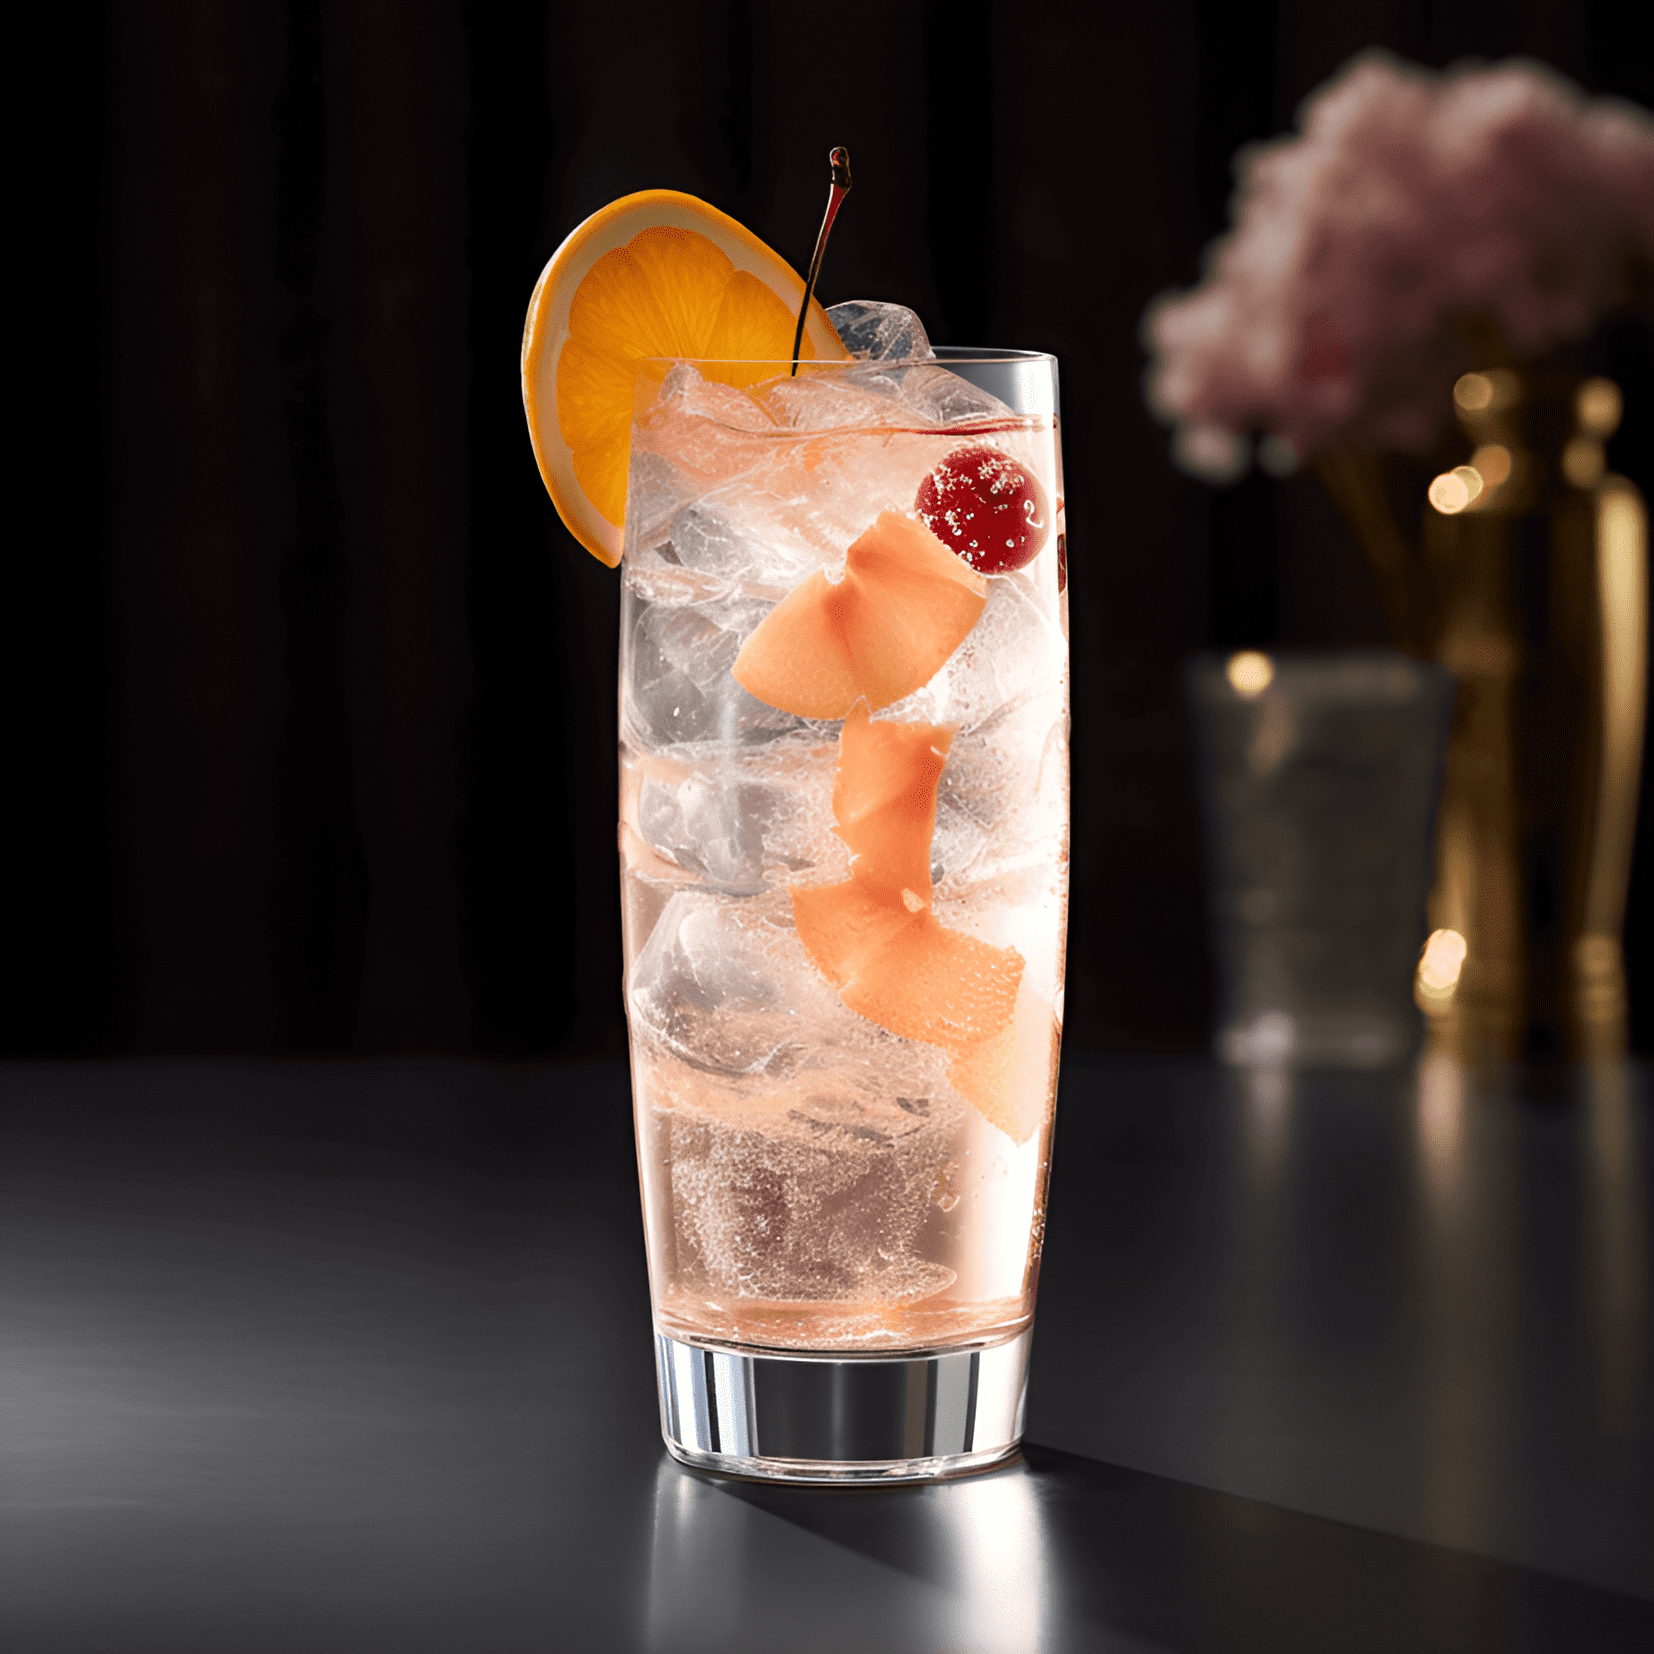 Japanese Fizz Cocktail Recipe - The Japanese Fizz is a refreshing, fruity, and slightly tangy cocktail. It has a delicate balance of sweet and sour flavors, with a hint of floral notes from the plum wine. The effervescence from the soda water adds a light and bubbly texture.